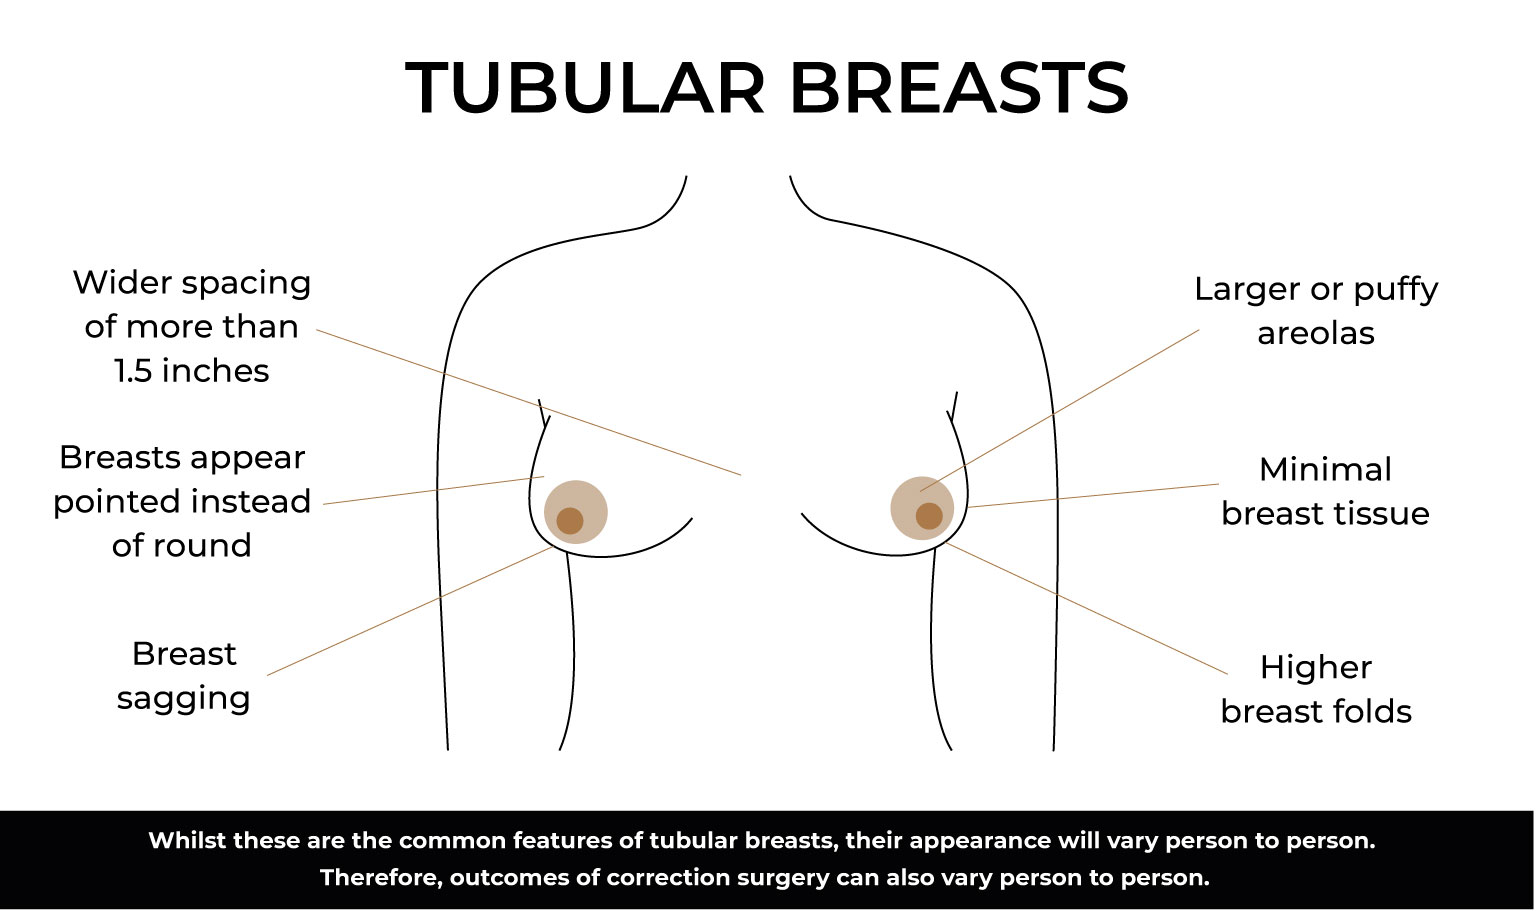 Conical Breasts Overview: What to Know